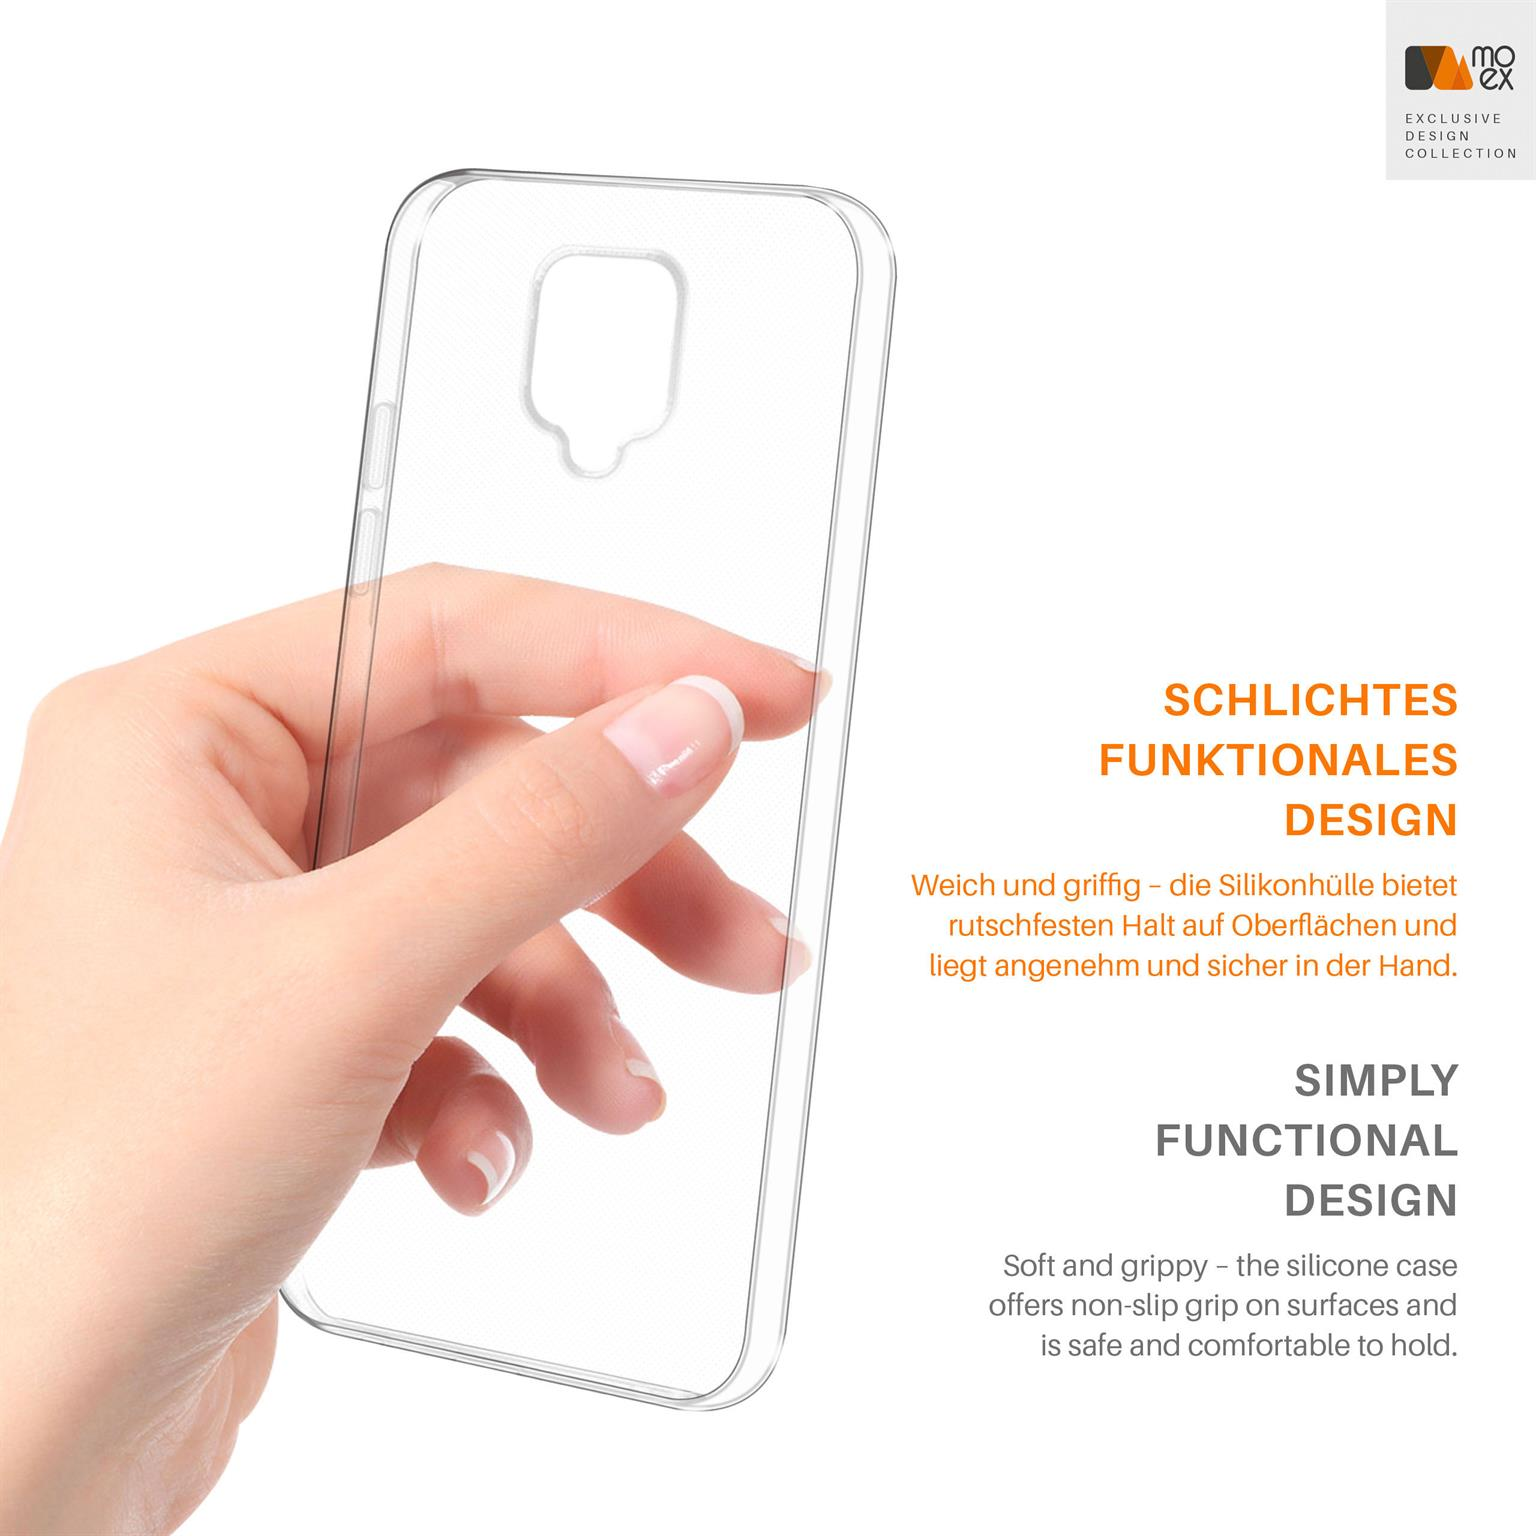 Pro, Backcover, Case, Crystal-Clear Xiaomi, MOEX 9 Redmi Aero Note